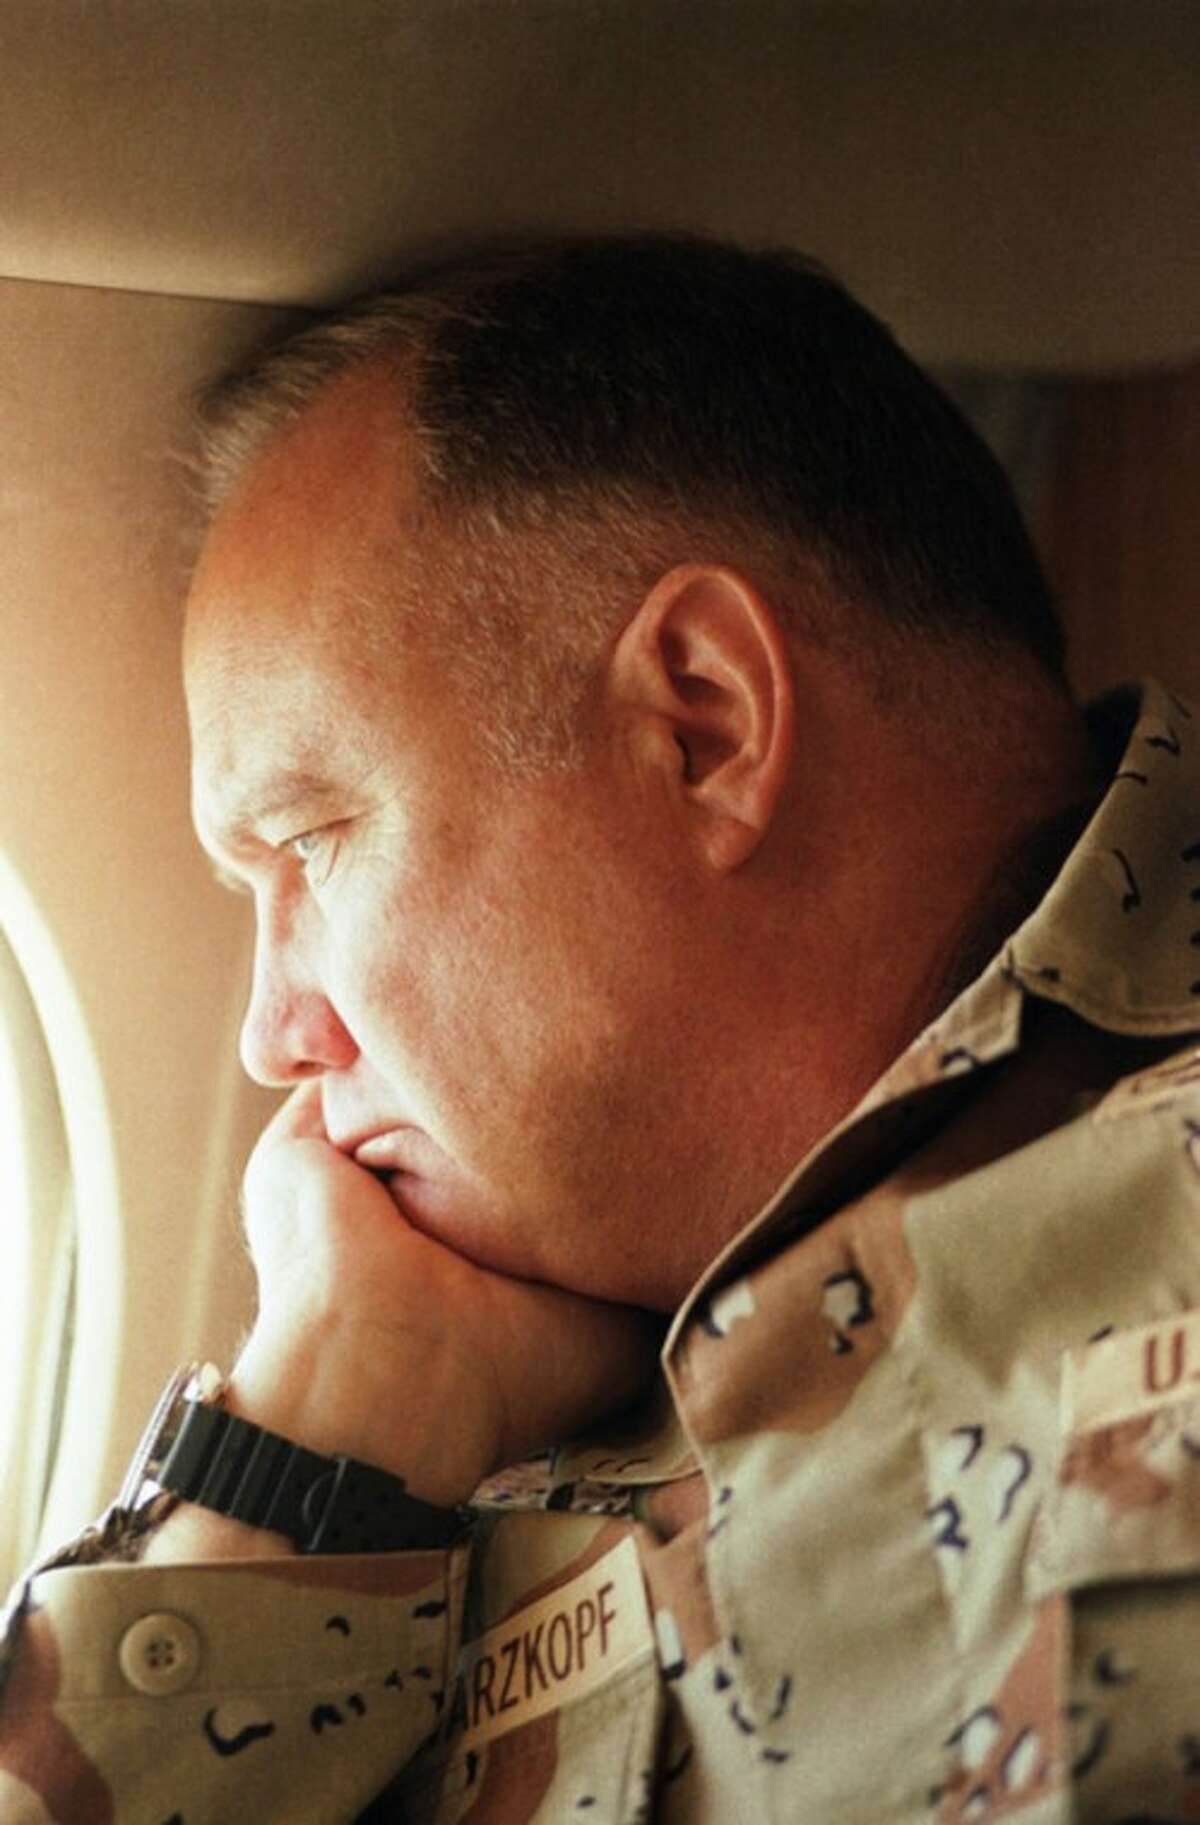 FILE - In this Jan. 13, 1991 file photo, General H. Norman Schwarzkopf, commander of U.S. troops in the Gulf, gazes from the window of his small jet on his way out to visit U.S. troops in the desert in Saudi Arabia. Schwarzkopf died Thursday, Dec. 27, 2012 in Tampa, Fla. He was 78. (AP Photo/Bob Daugherty, File)